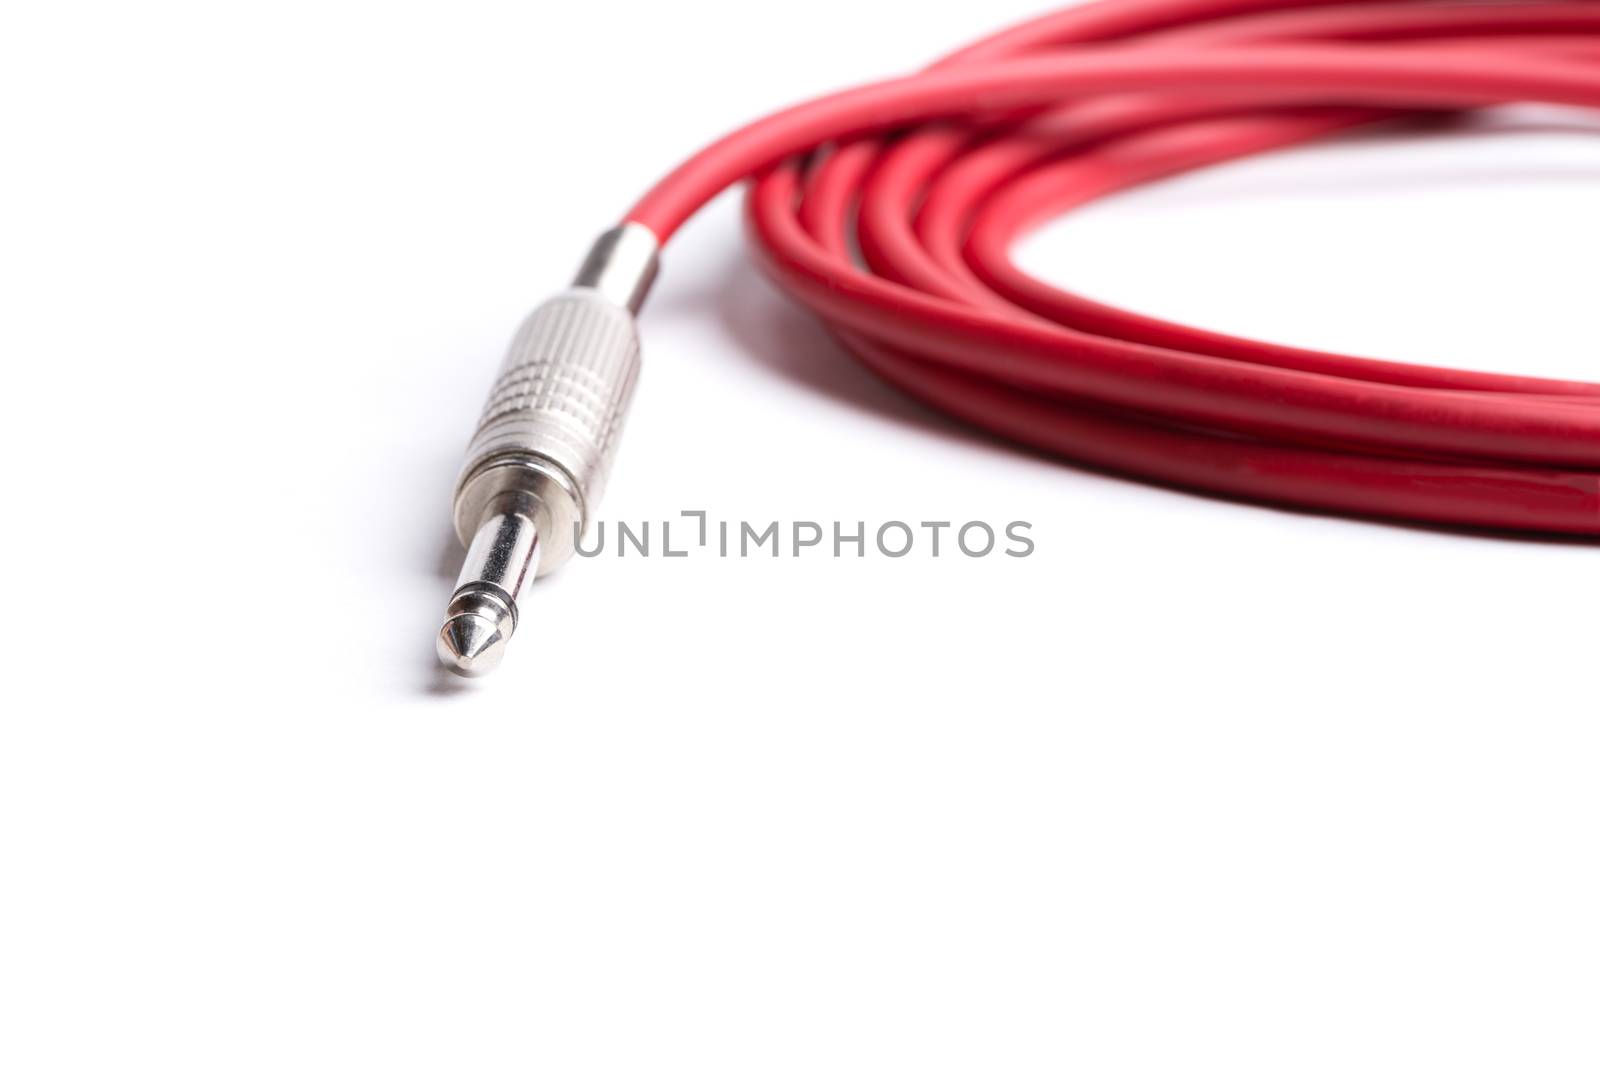 A red quarter inch cable for electric guitar isolated on a white background.